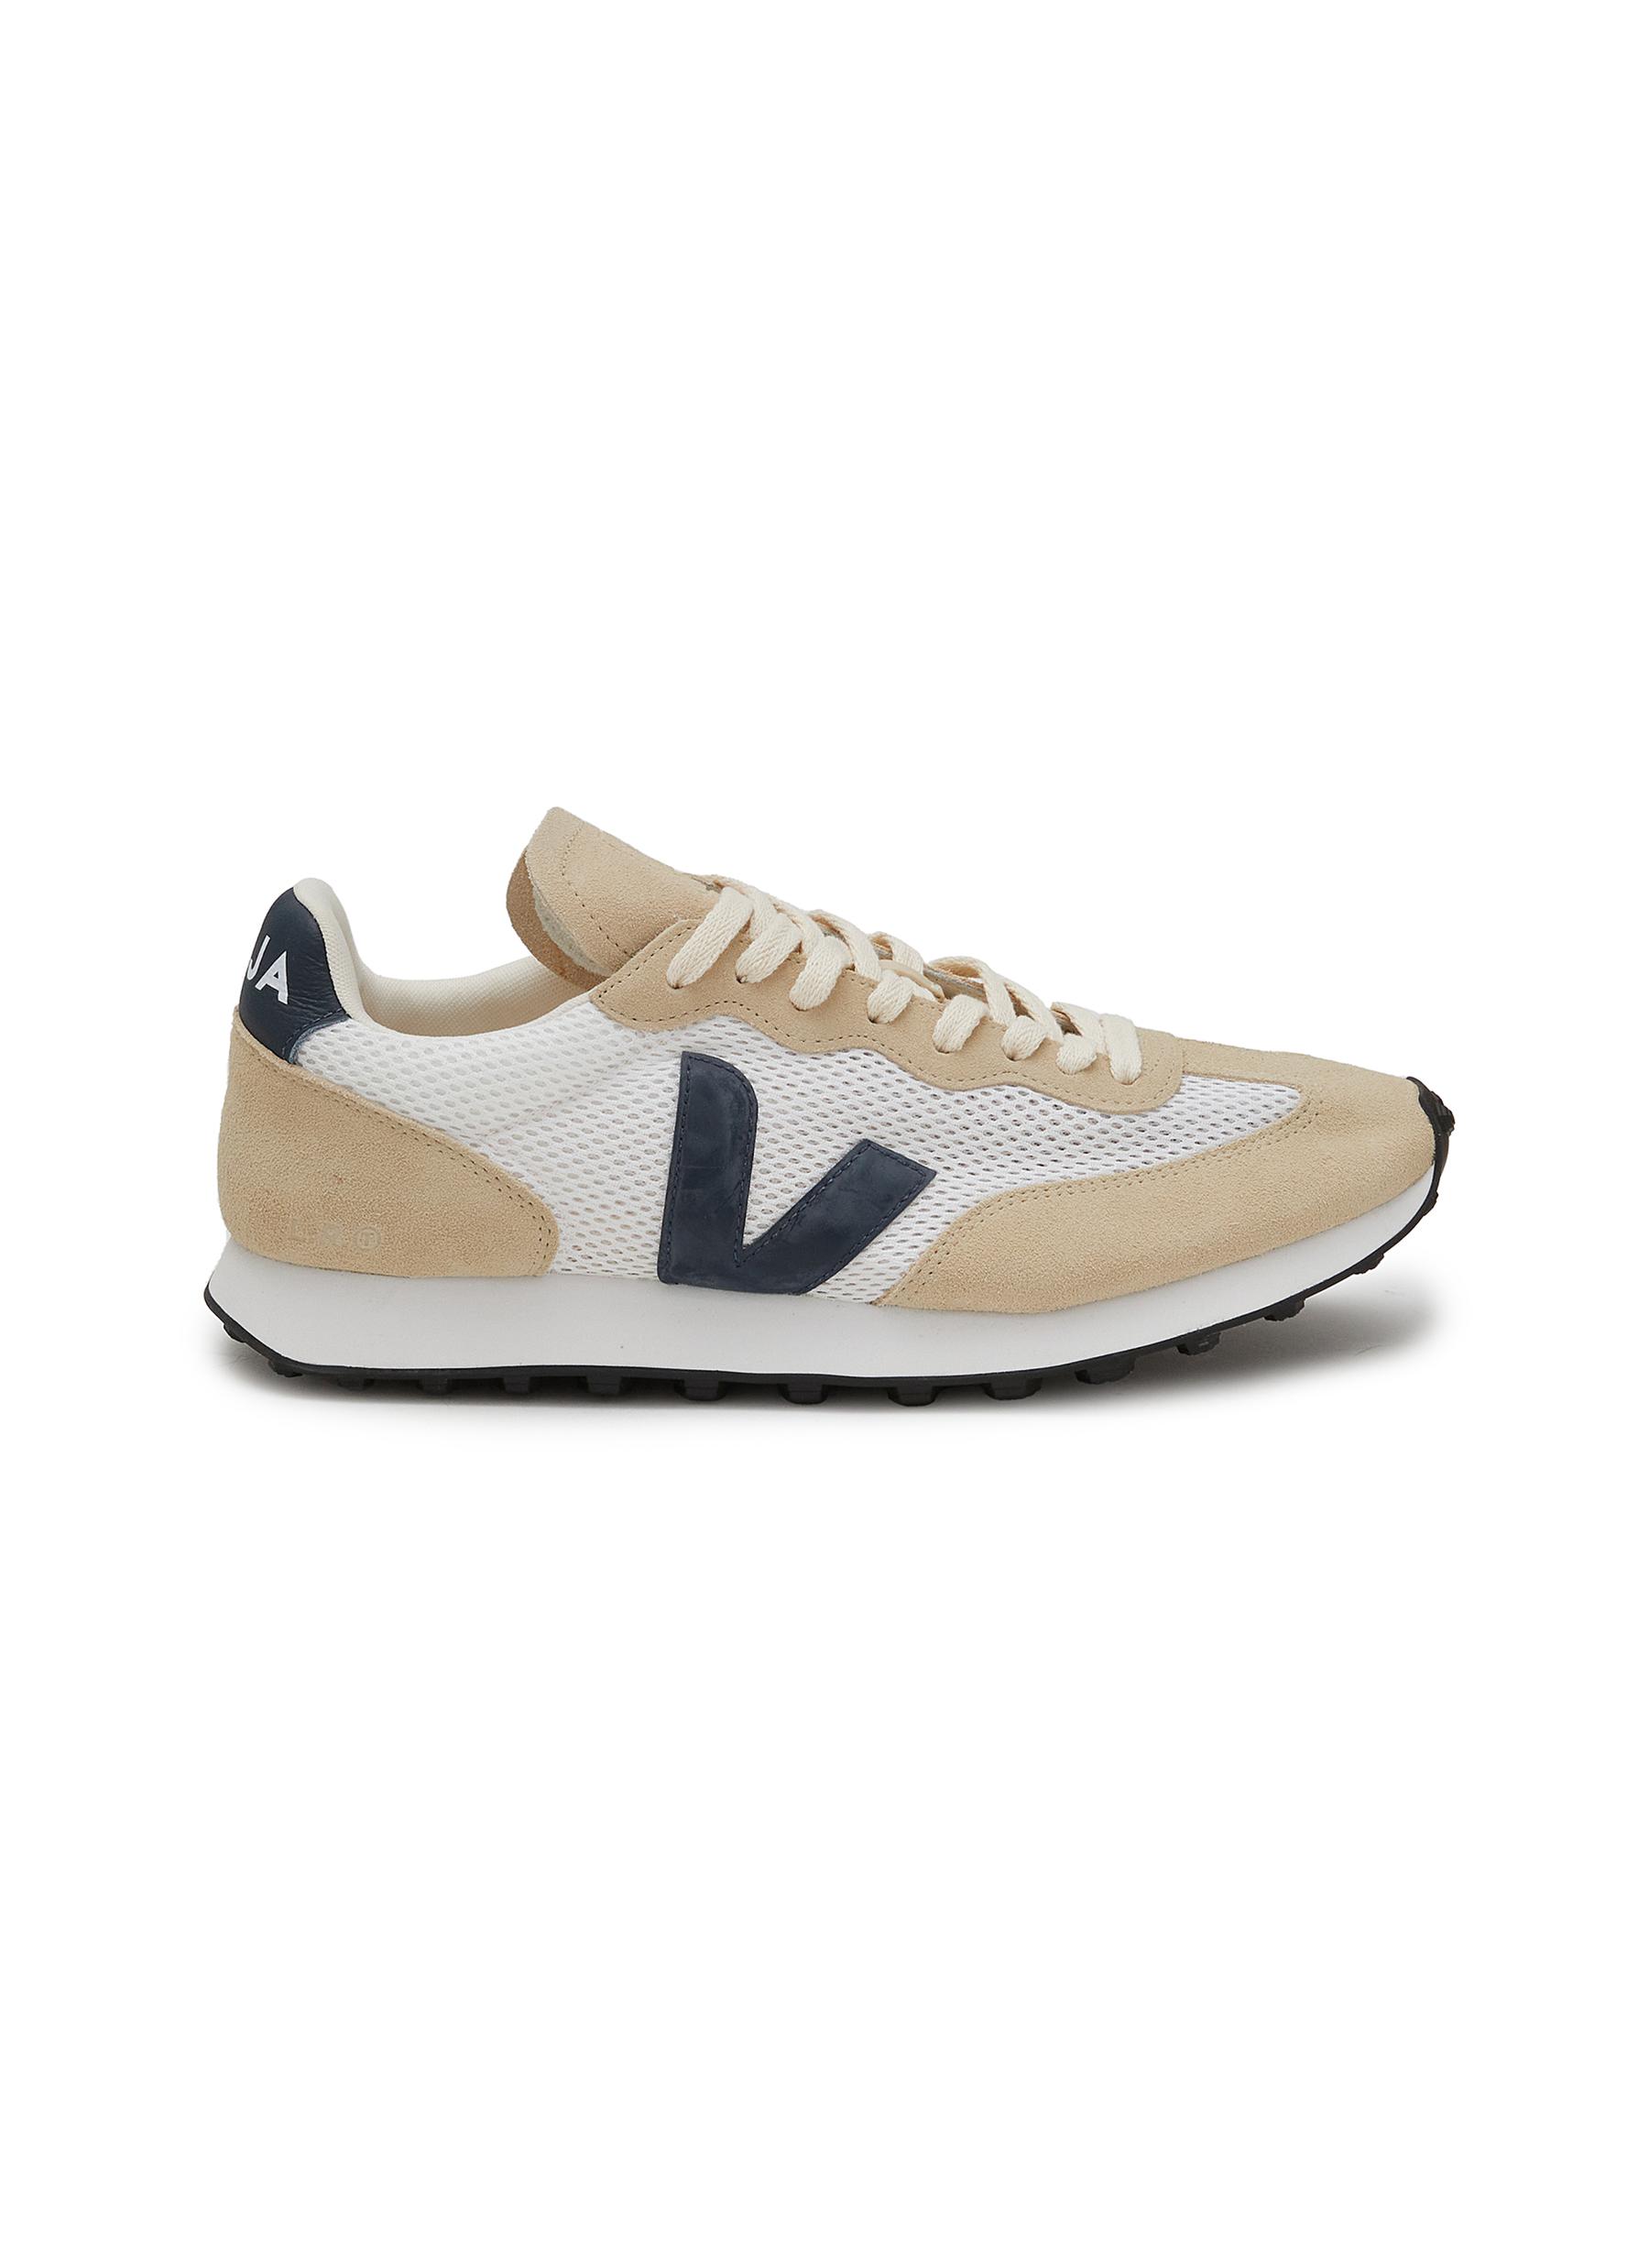 Rio Branco Aircell Lace Up Sneakers